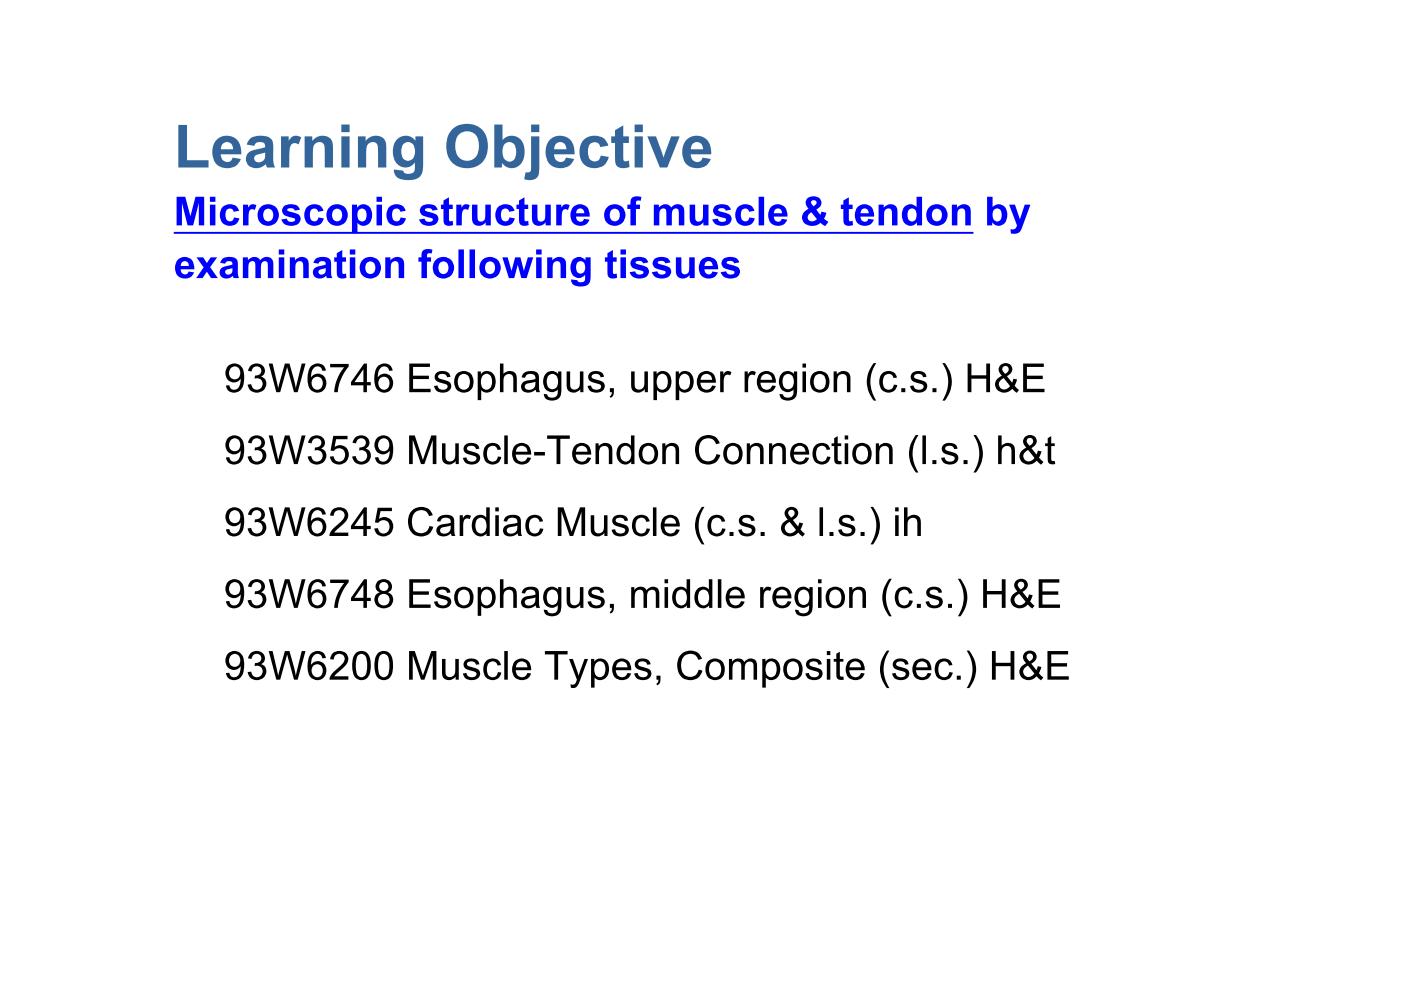 block6-2_04.jpg - Learning ObjectiveMicroscopic structure of muscle & tendon byexamination following tissues  93W6746 Esophagus, upper region (c.s.) H&E  93W3539 Muscle-Tendon Connection (l.s.) h&t  93W6245 Cardiac Muscle (c.s. & l.s.) ih  93W6748 Esophagus, middle region (c.s.) H&E  93W6200 Muscle Types, Composite (sec.) H&E